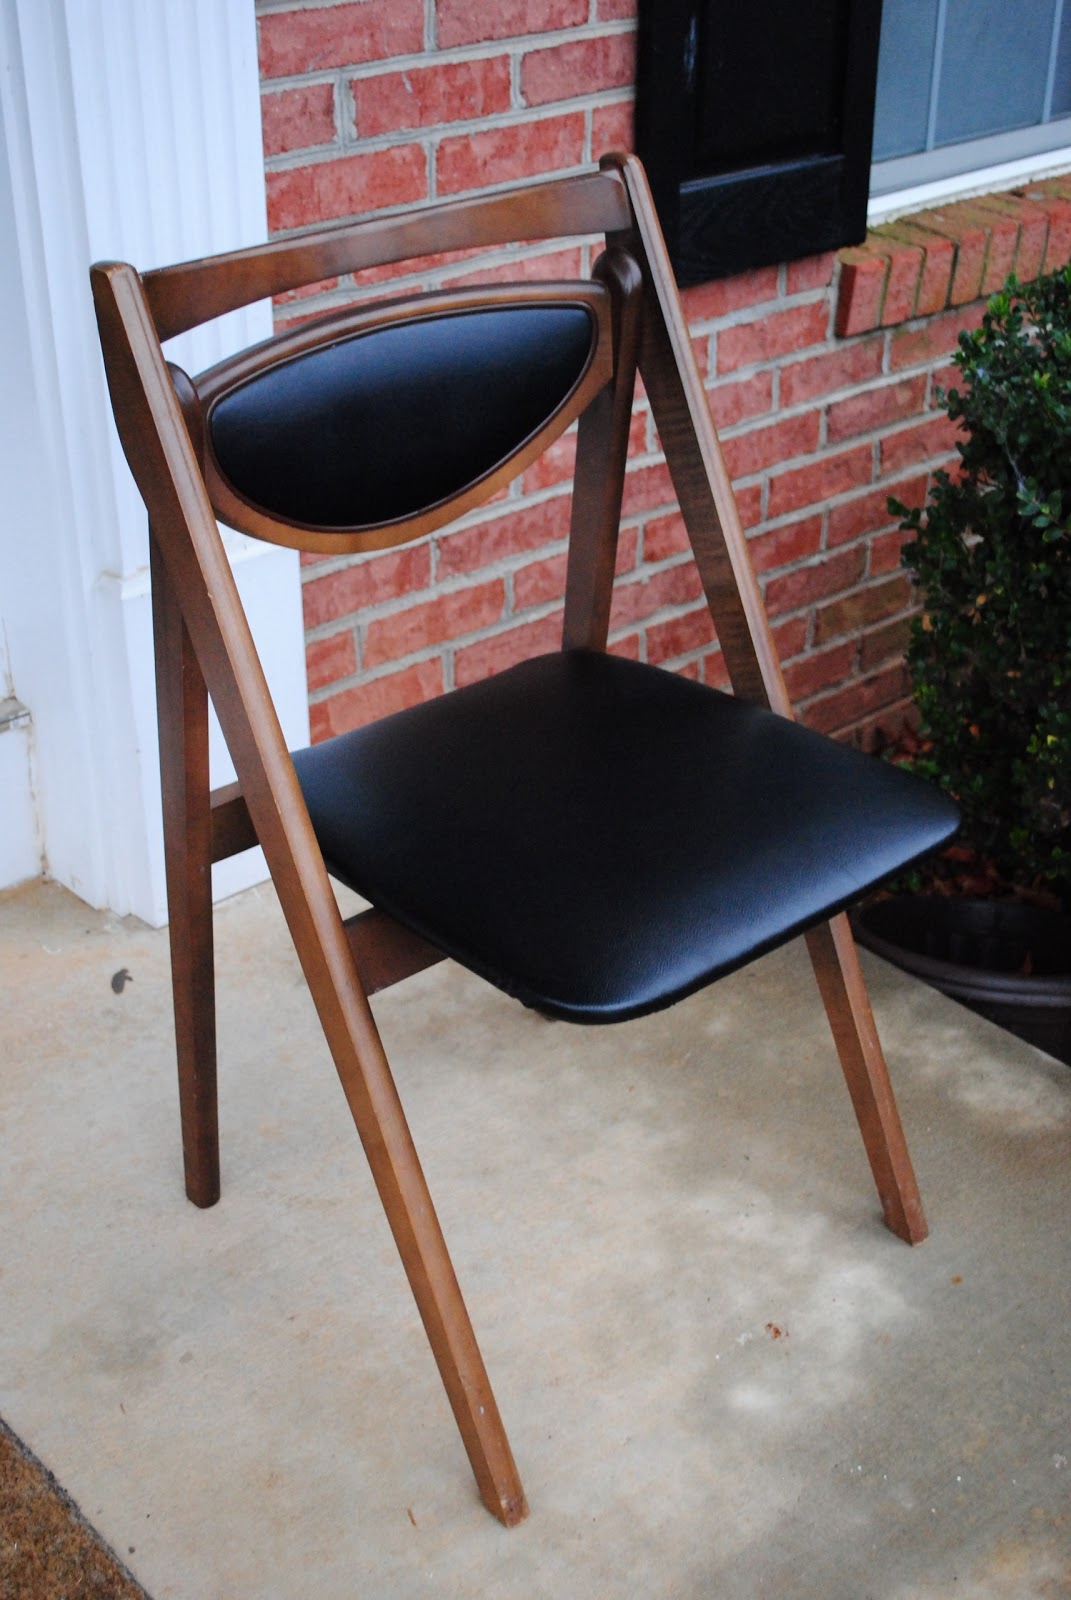 Stakmore folding chairs